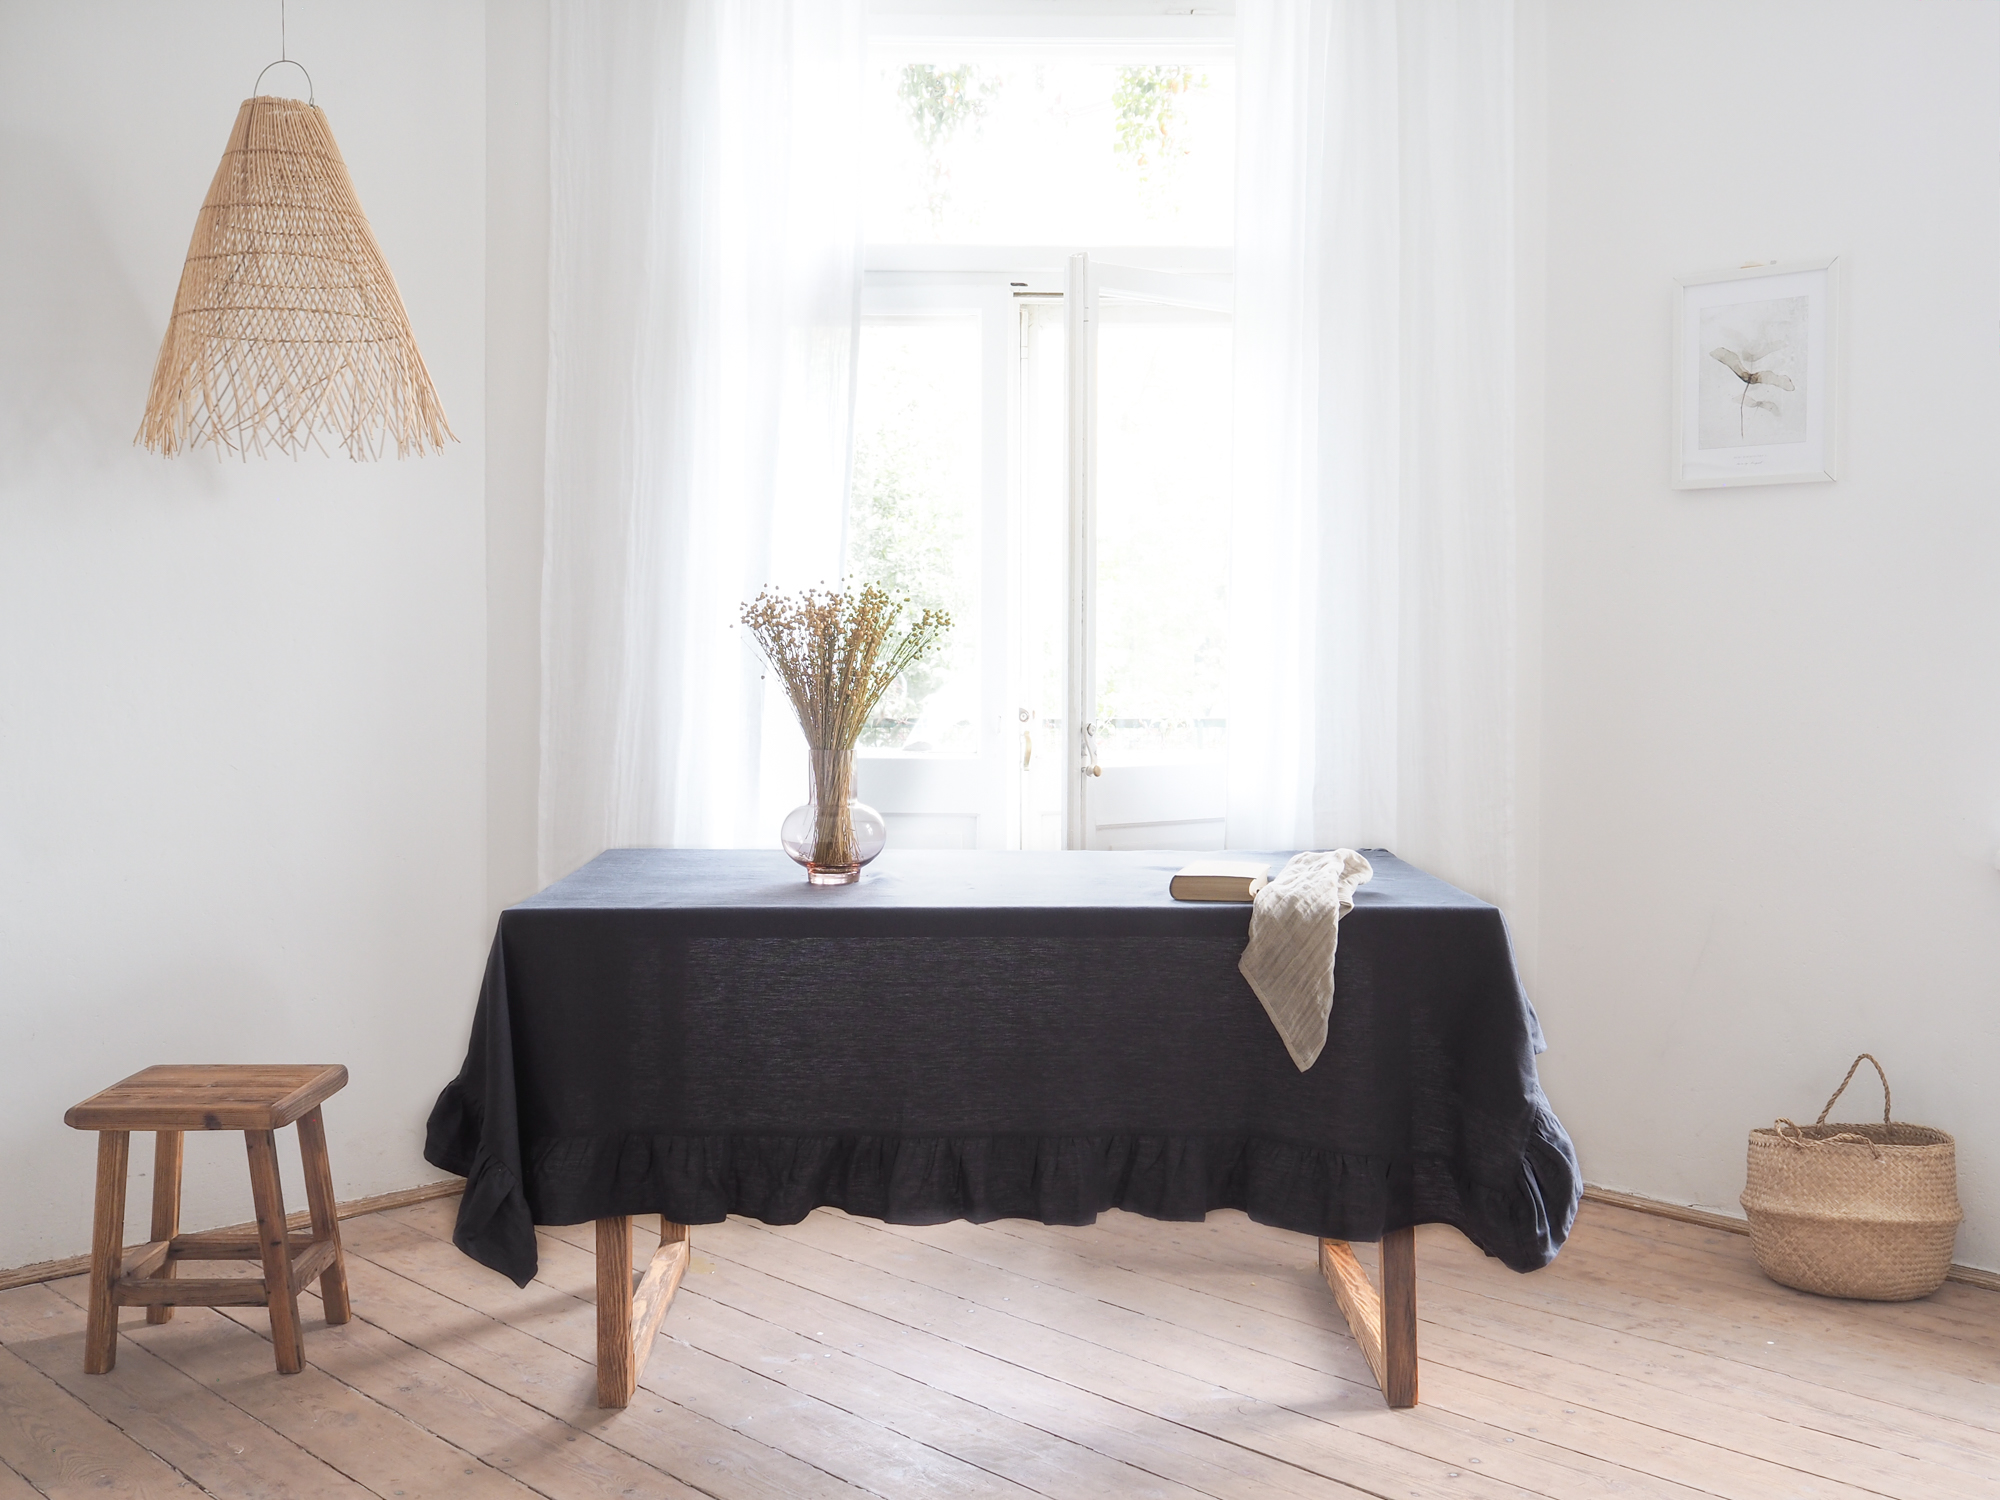 Charcoal thick linen tablecloth